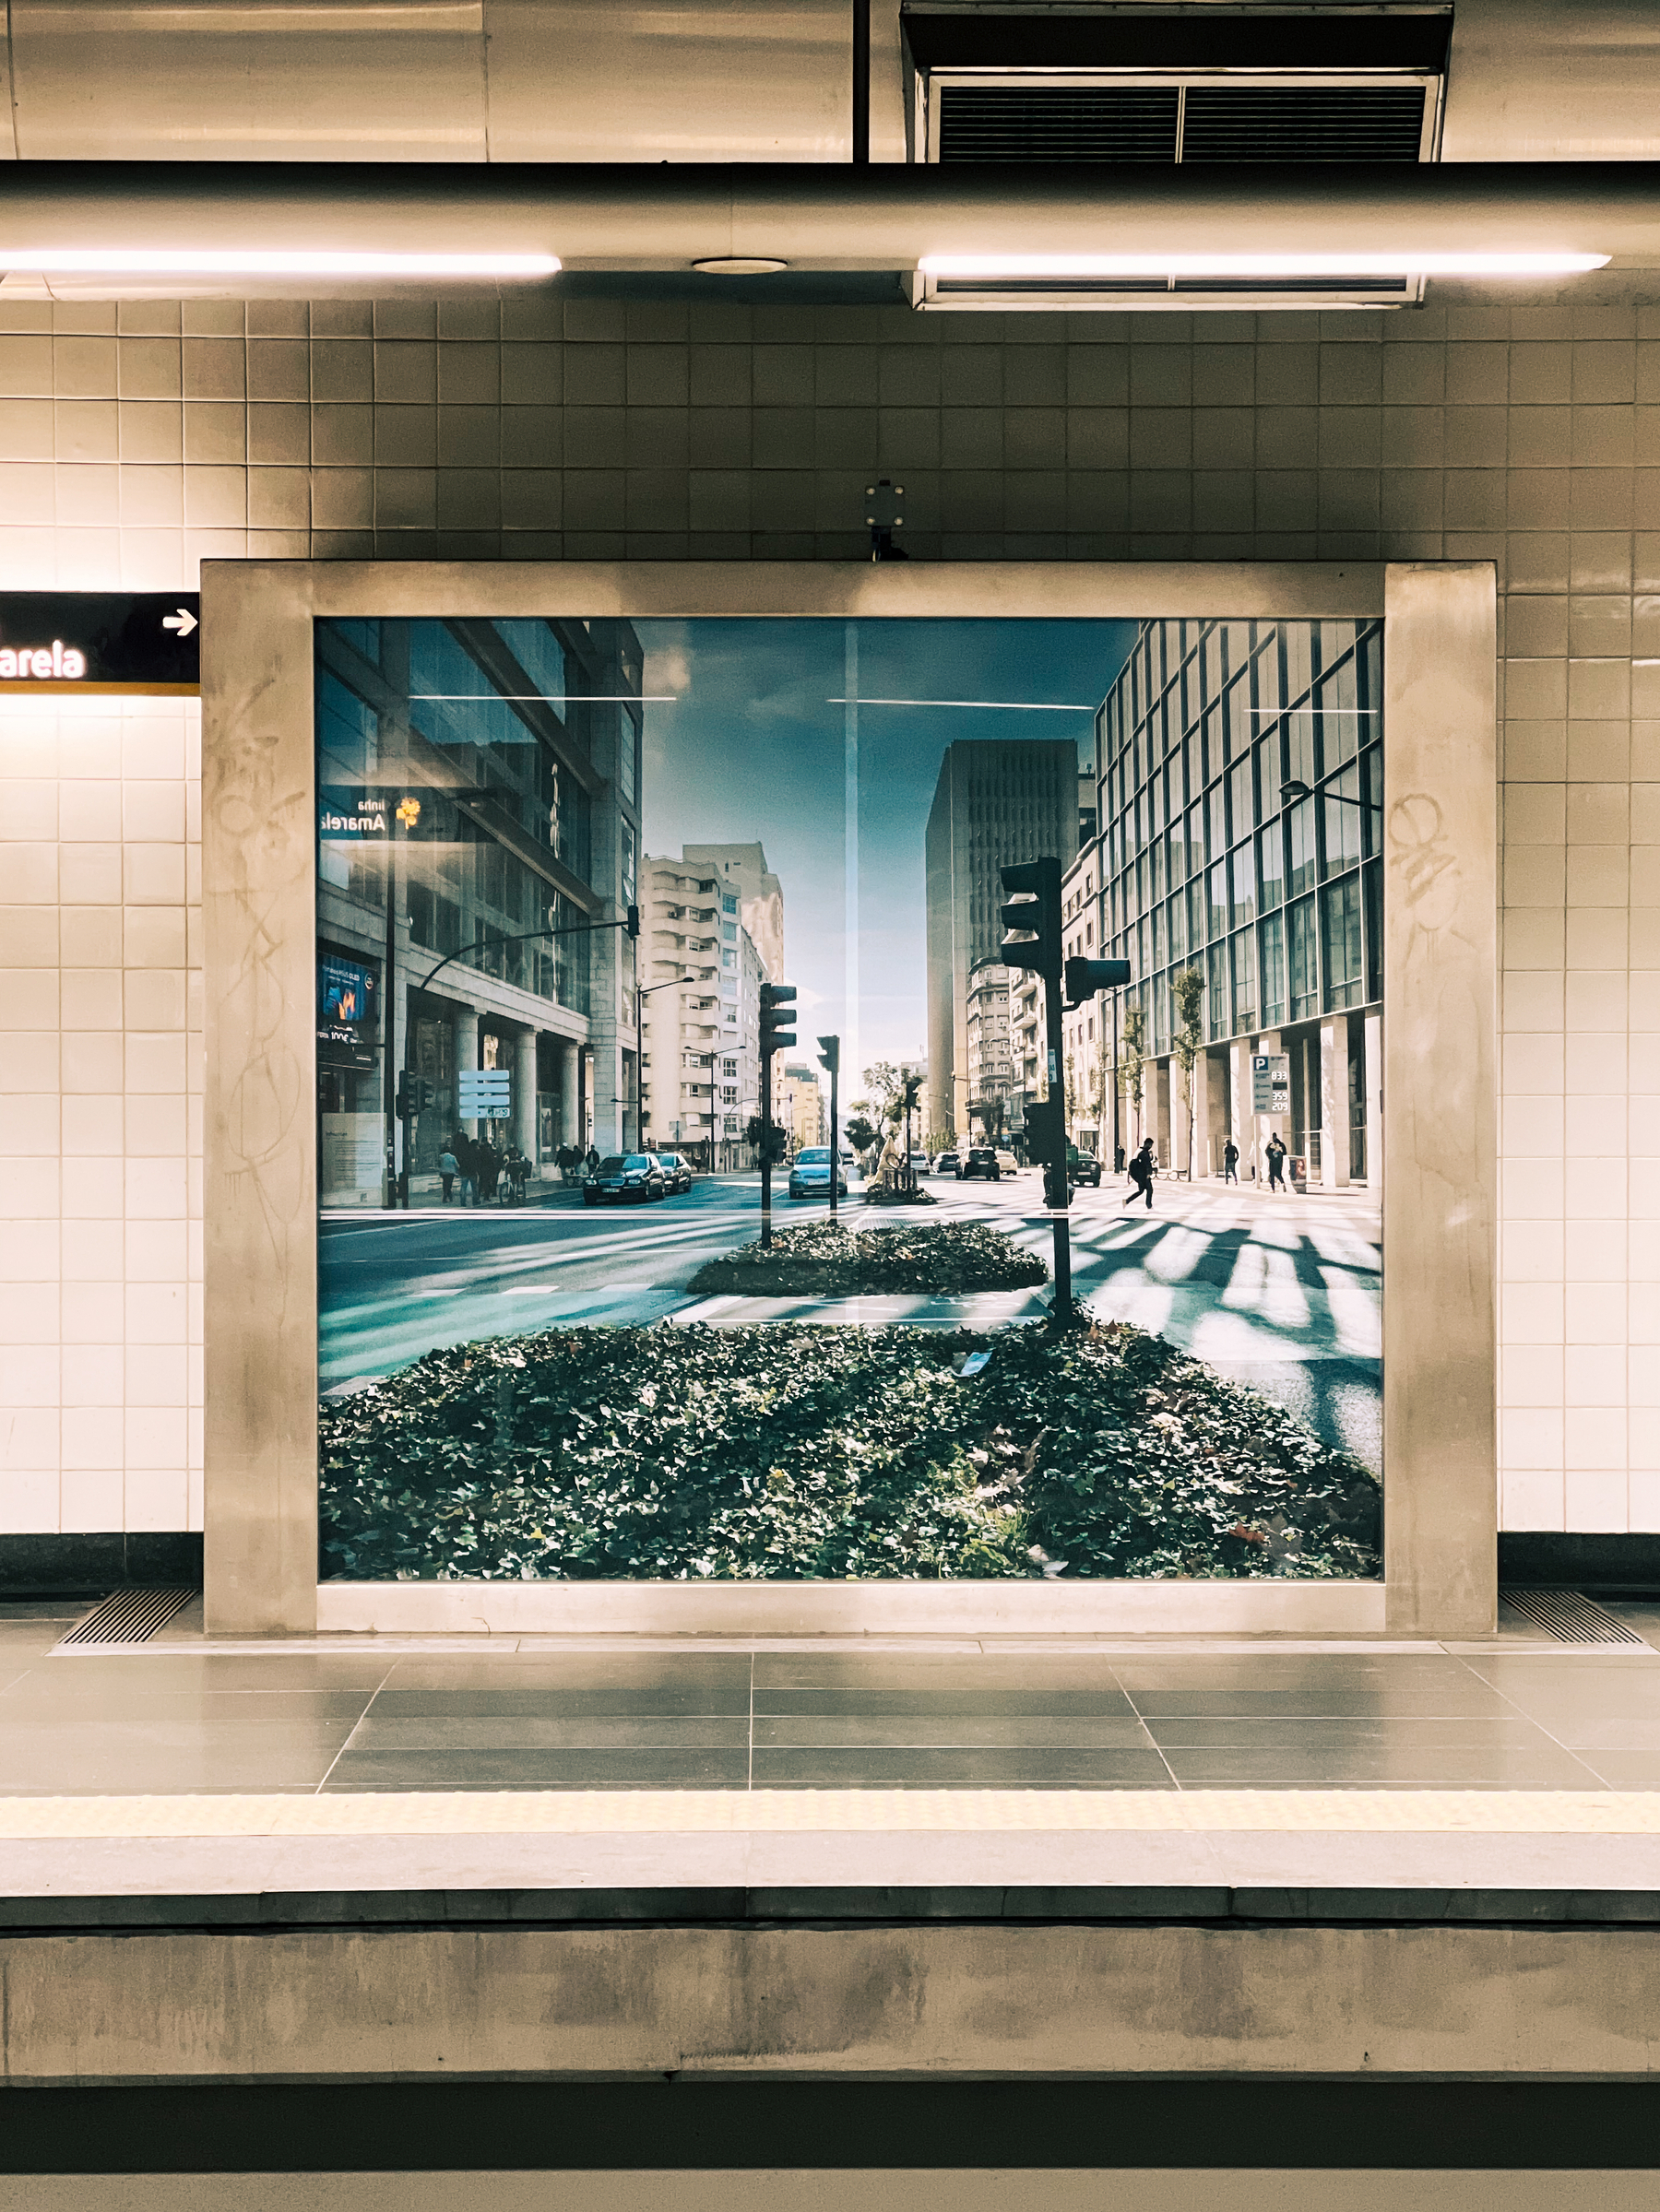 A cityscape photo on display on the subway.